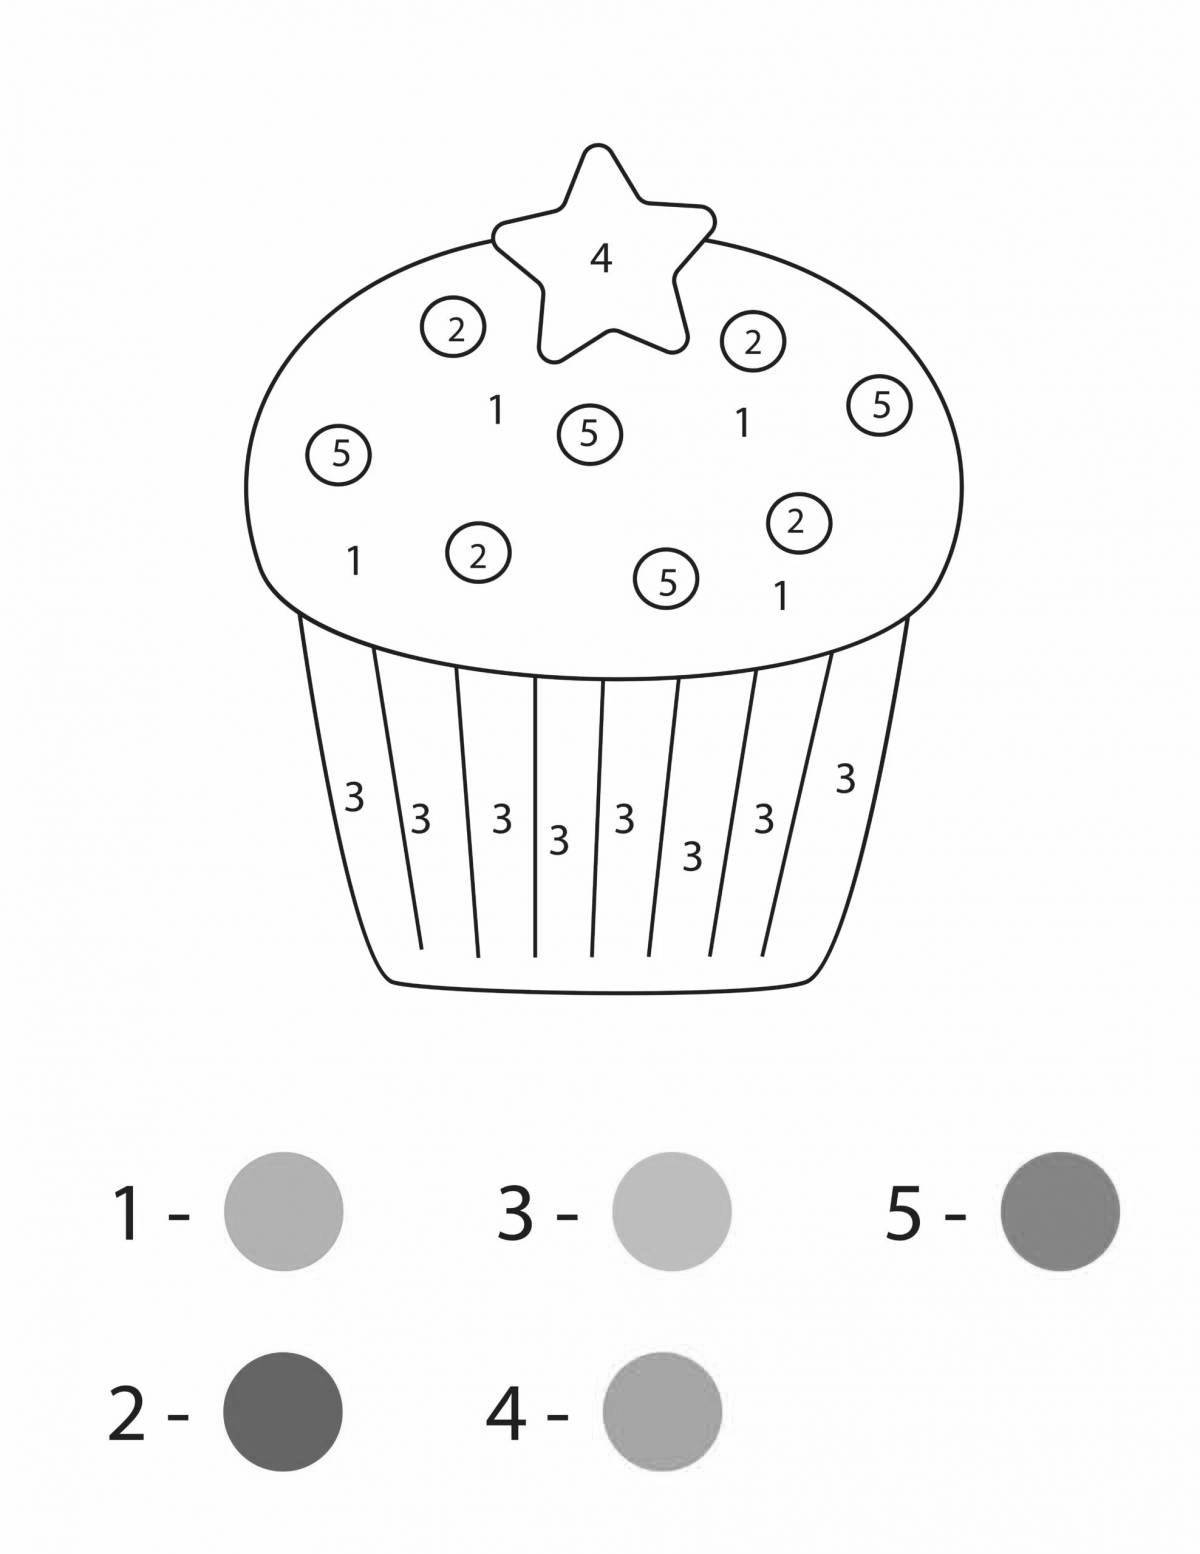 Intriguing strawberry number coloring game